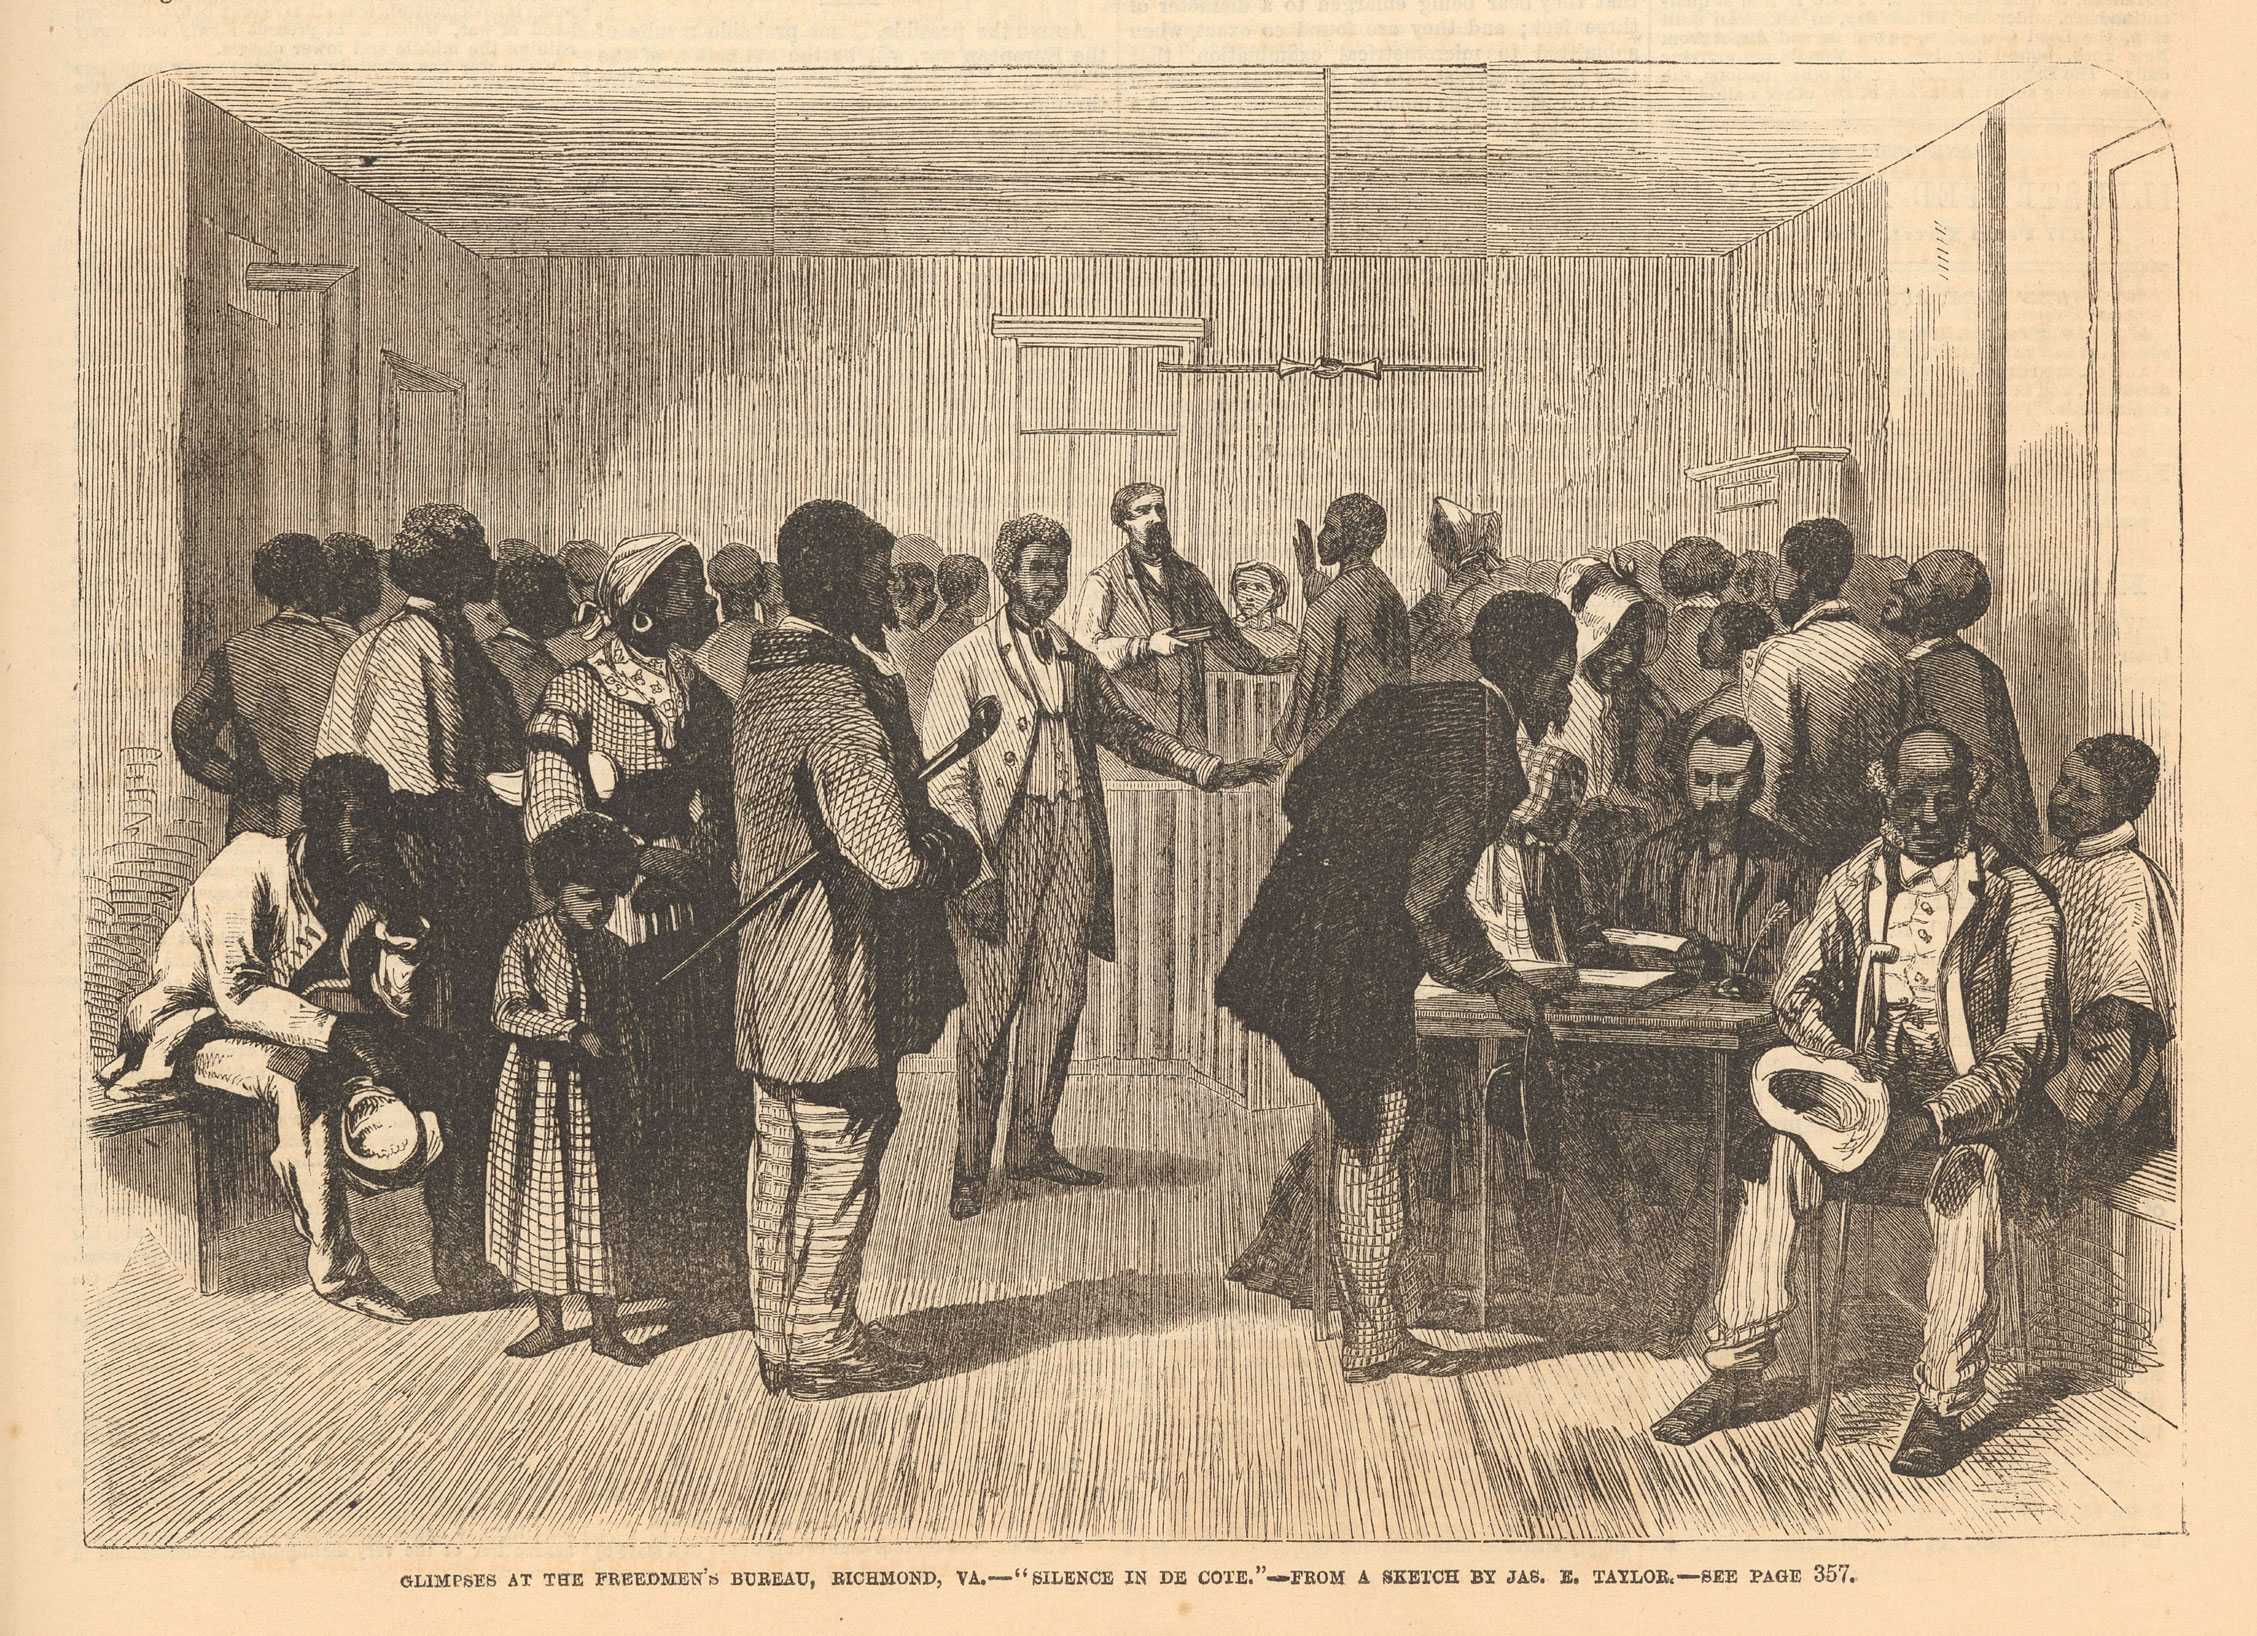 A drawing of the Freedmen's Bureau. People of all ages talking and discussing and others are standing in line.